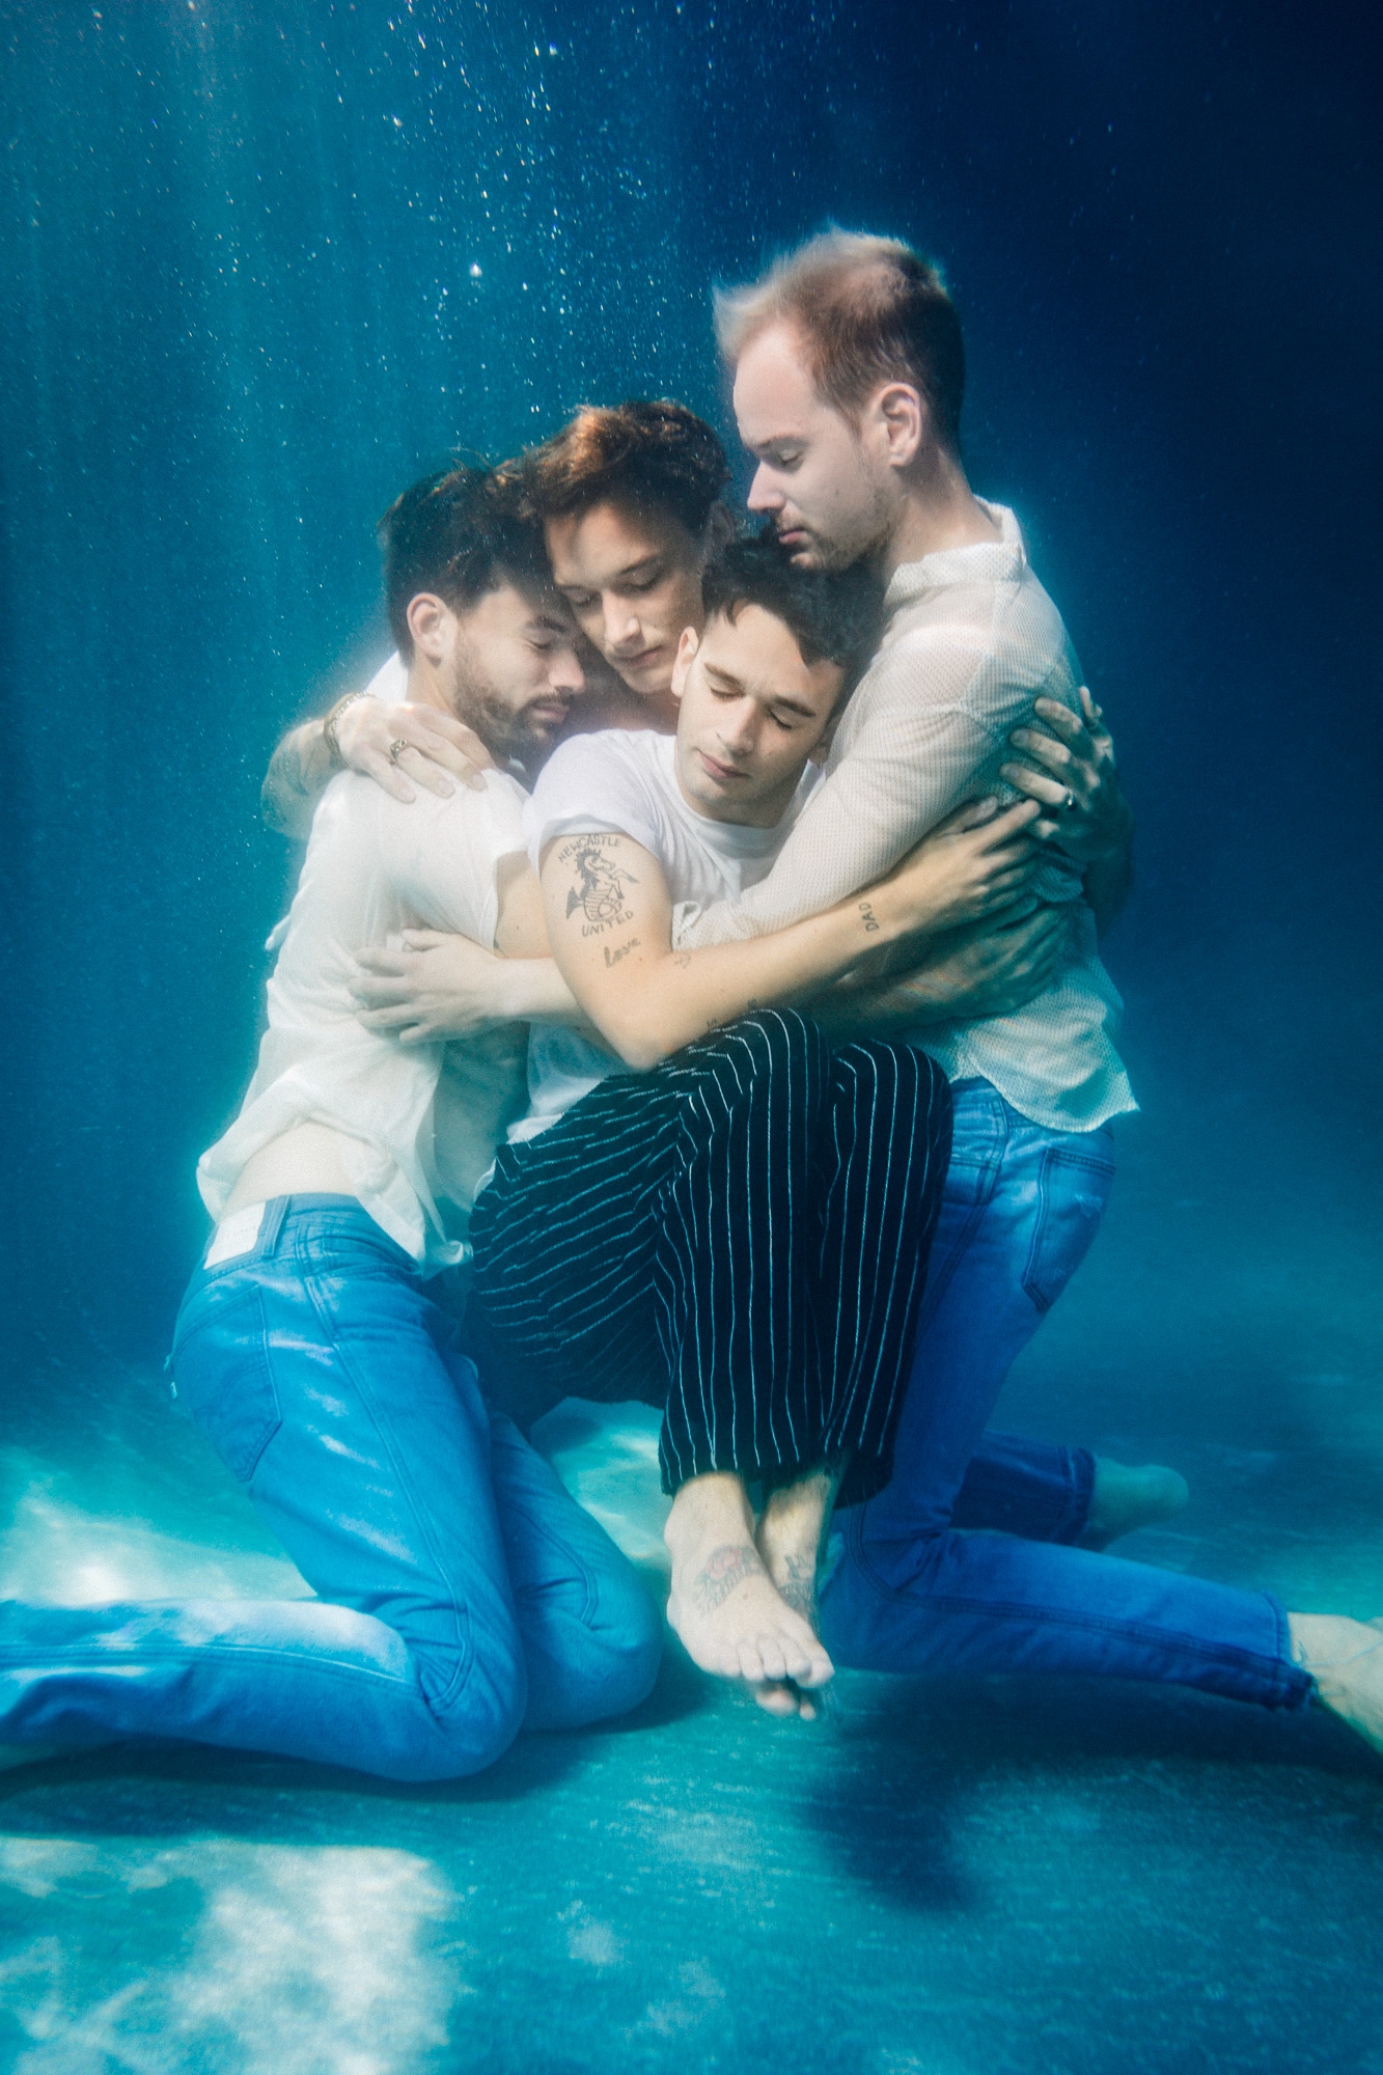 Press photo for The 1975 by Rachael Wright